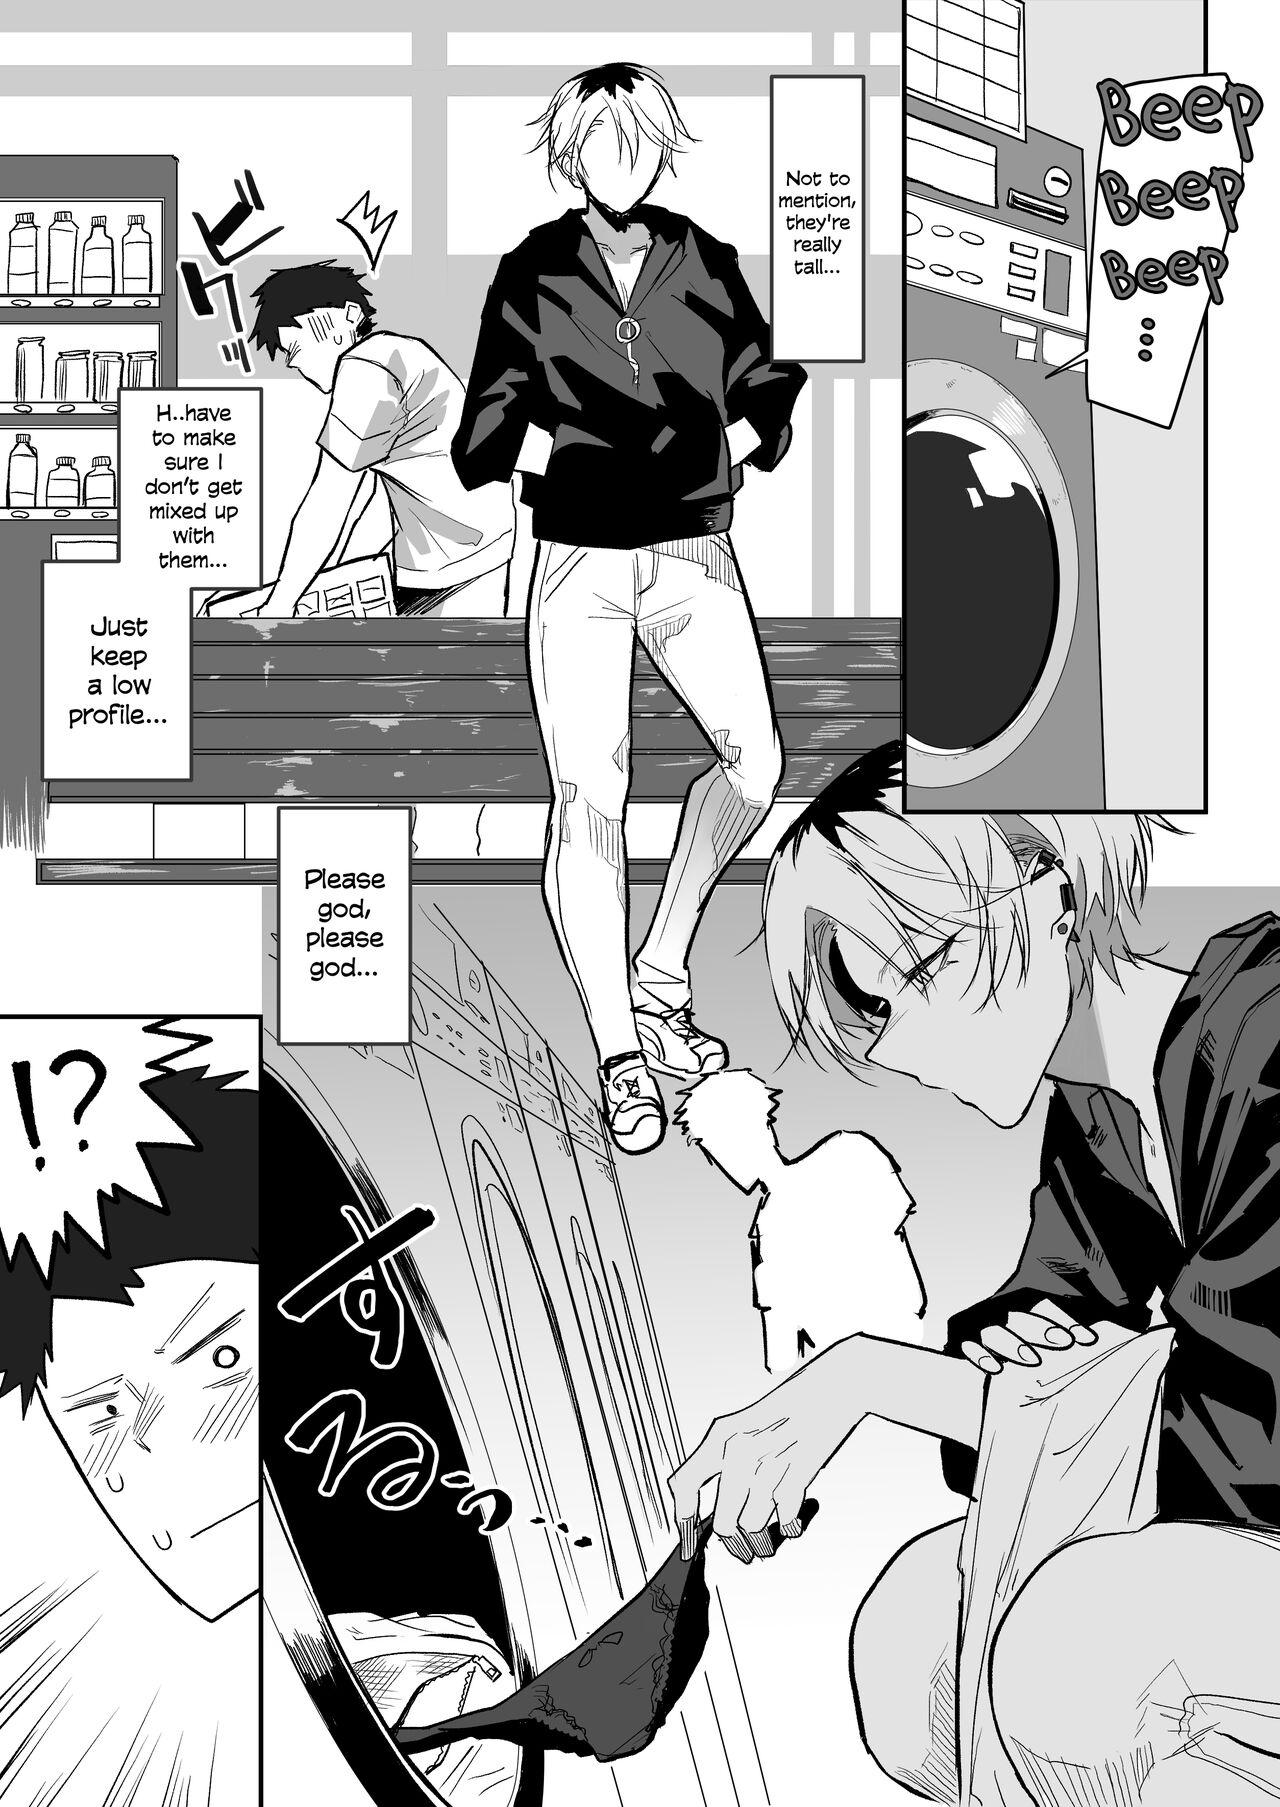 Parody Coin Laundry de Kowai Yankee ni Karamareru Manga | A Manga About Getting Mixed Up With A Scary Delinquent At The Laundromat - Original Fuck For Money - Picture 2